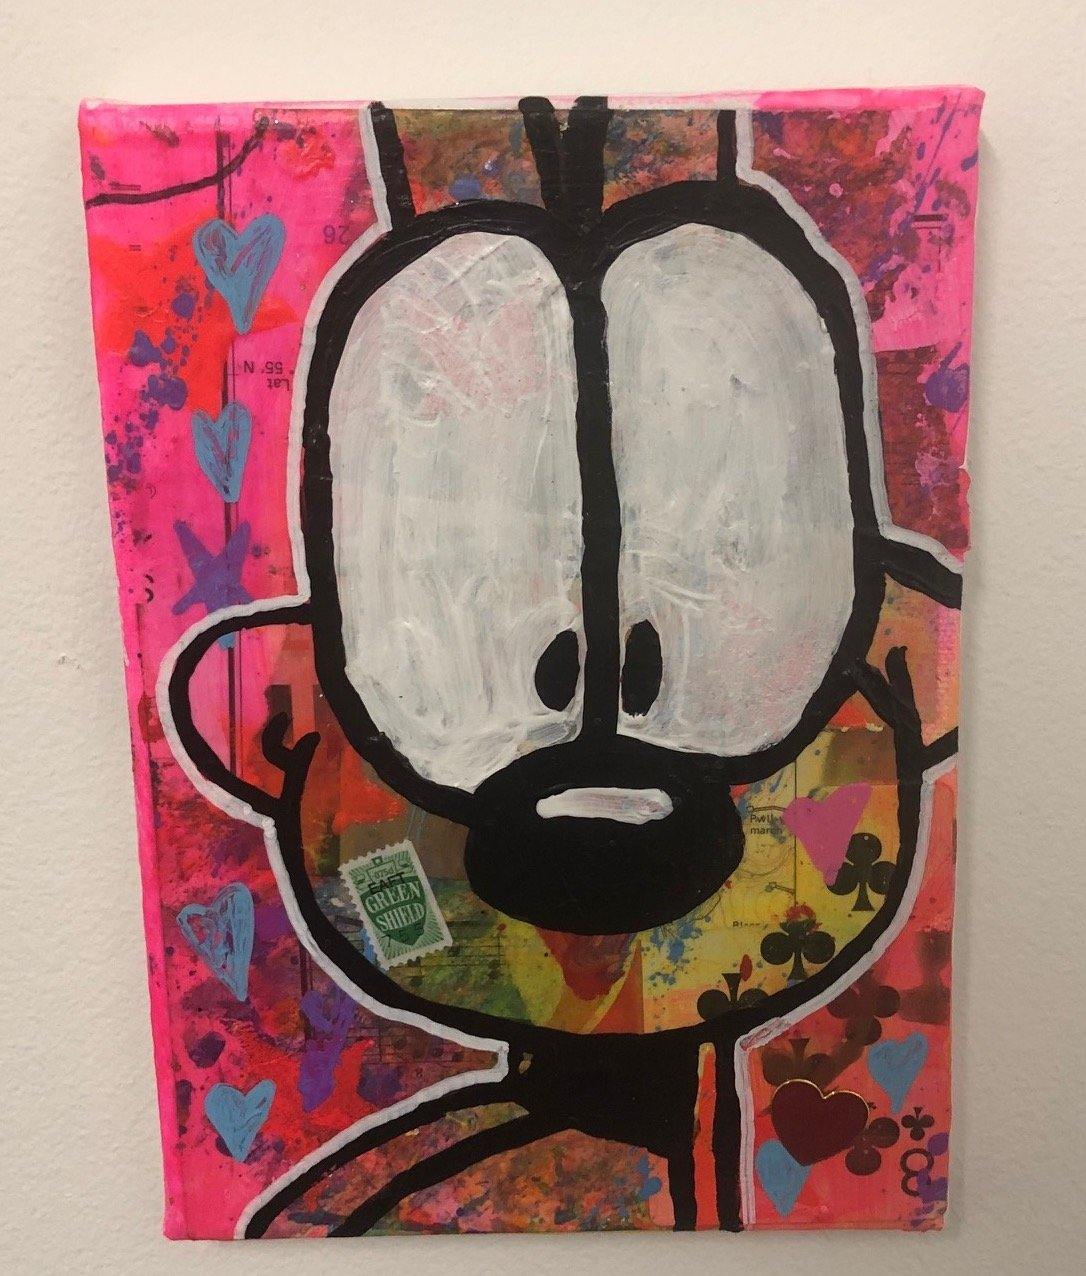 Eyes for you by Barrie J Davies 2019, Mixed media on Canvas, 21cm x 15cm, Unframed. Barrie J Davies is an Artist - Pop Art and Street art inspired Artist based in Brighton England UK - Pop Art Paintings, Street Art Prints & Editions available